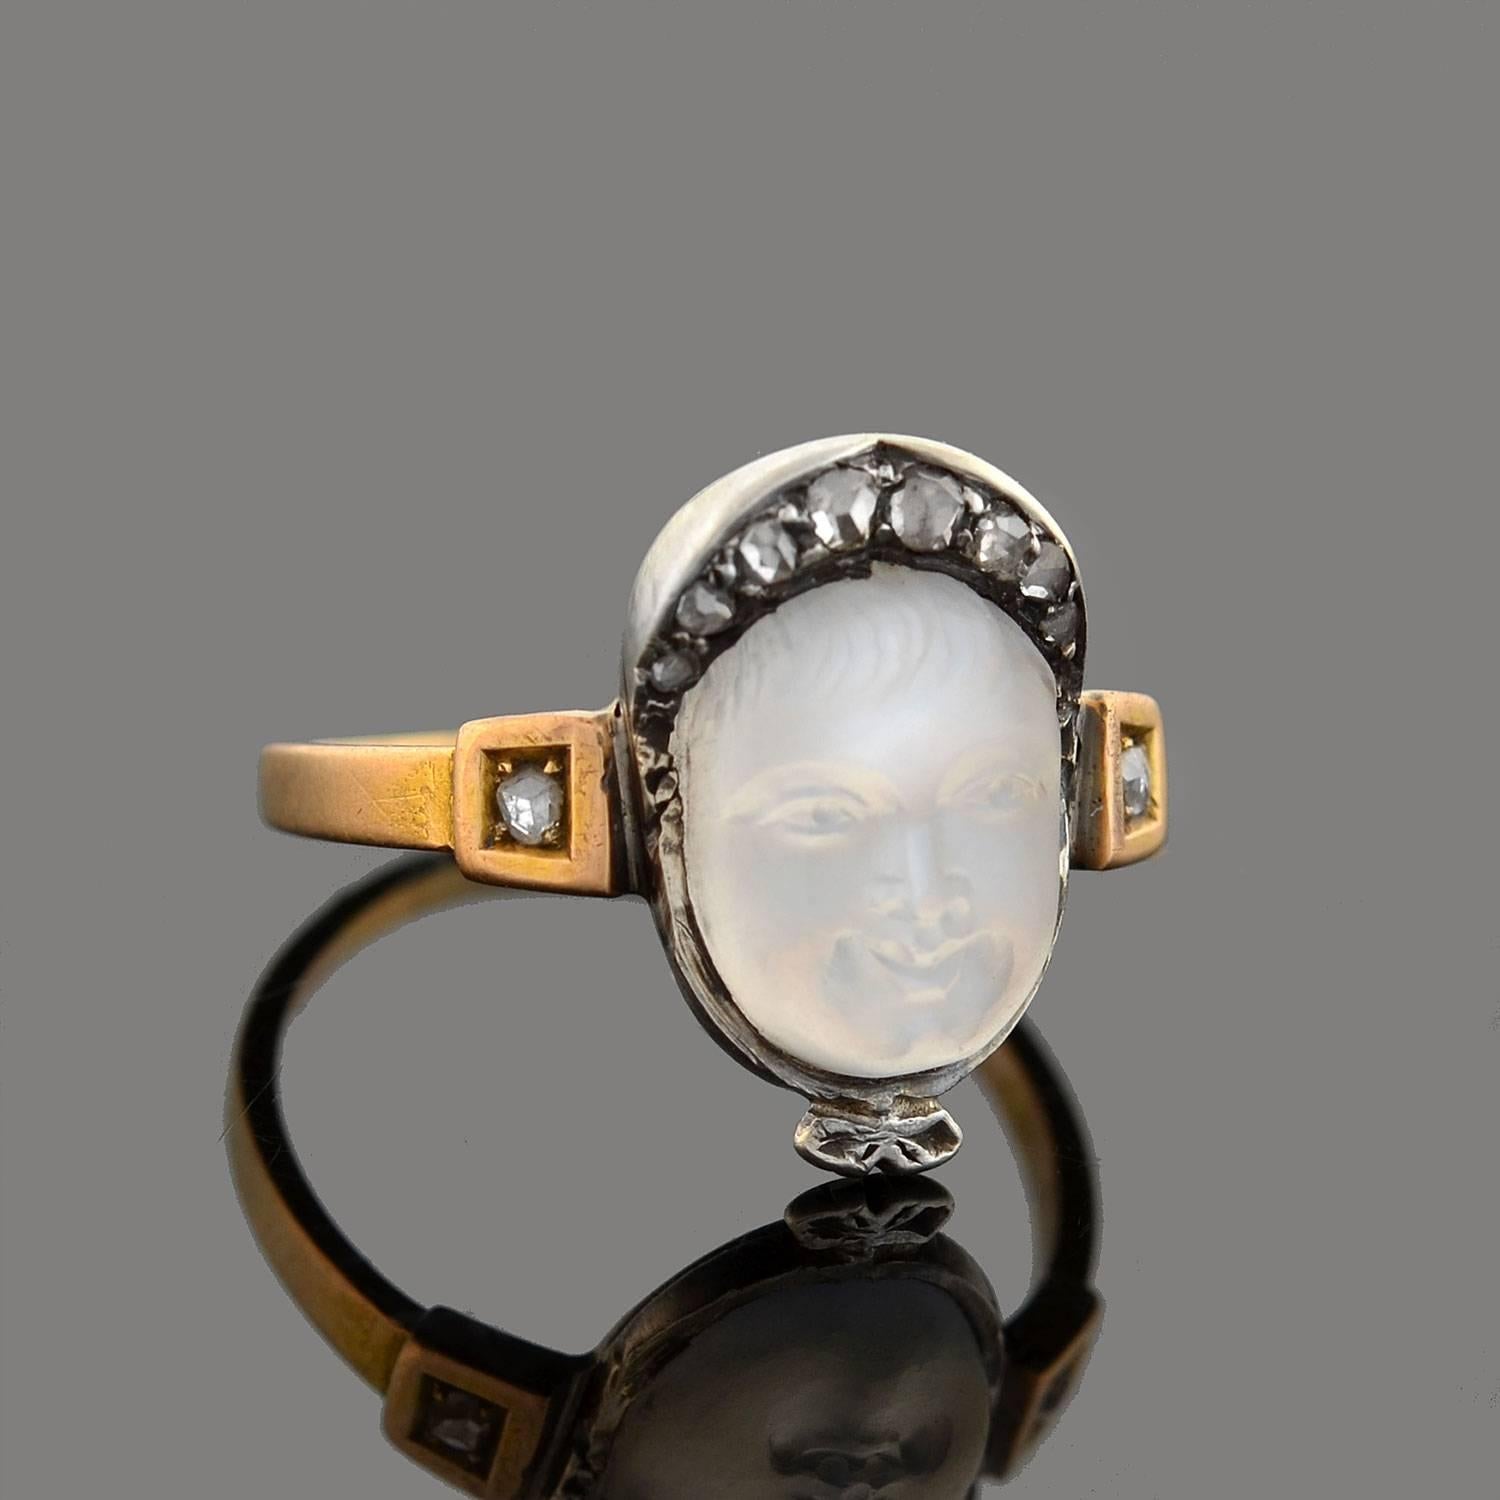 A beautiful and very unusual moonstone ring from the Victorian (ca1885) era! This alluring piece is crafted in sterling silver and 18kt yellow gold and features a single moonstone cameo in the center. The moonstone is delicately hand-carved to